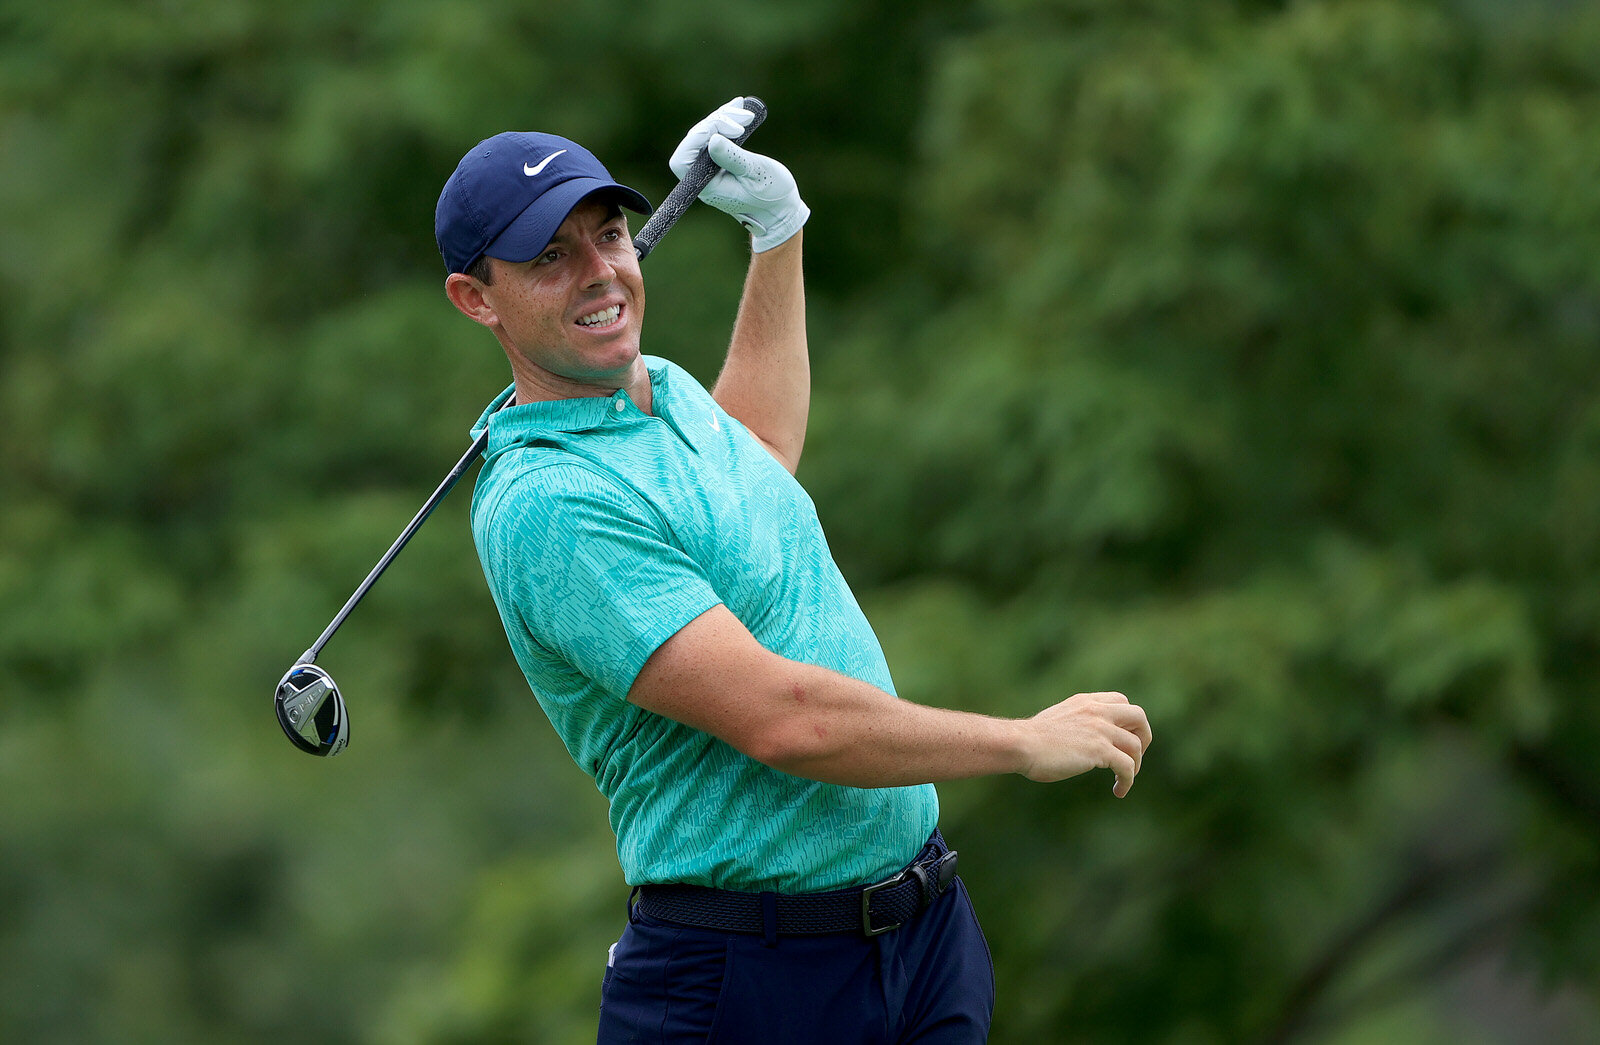  DUBLIN, OHIO - JULY 16: Rory McIlroy of Northern Ireland plays his shot from the fifth tee during the first round of The Memorial Tournament on July 16, 2020 at Muirfield Village Golf Club in Dublin, Ohio. (Photo by Sam Greenwood/Getty Images) 